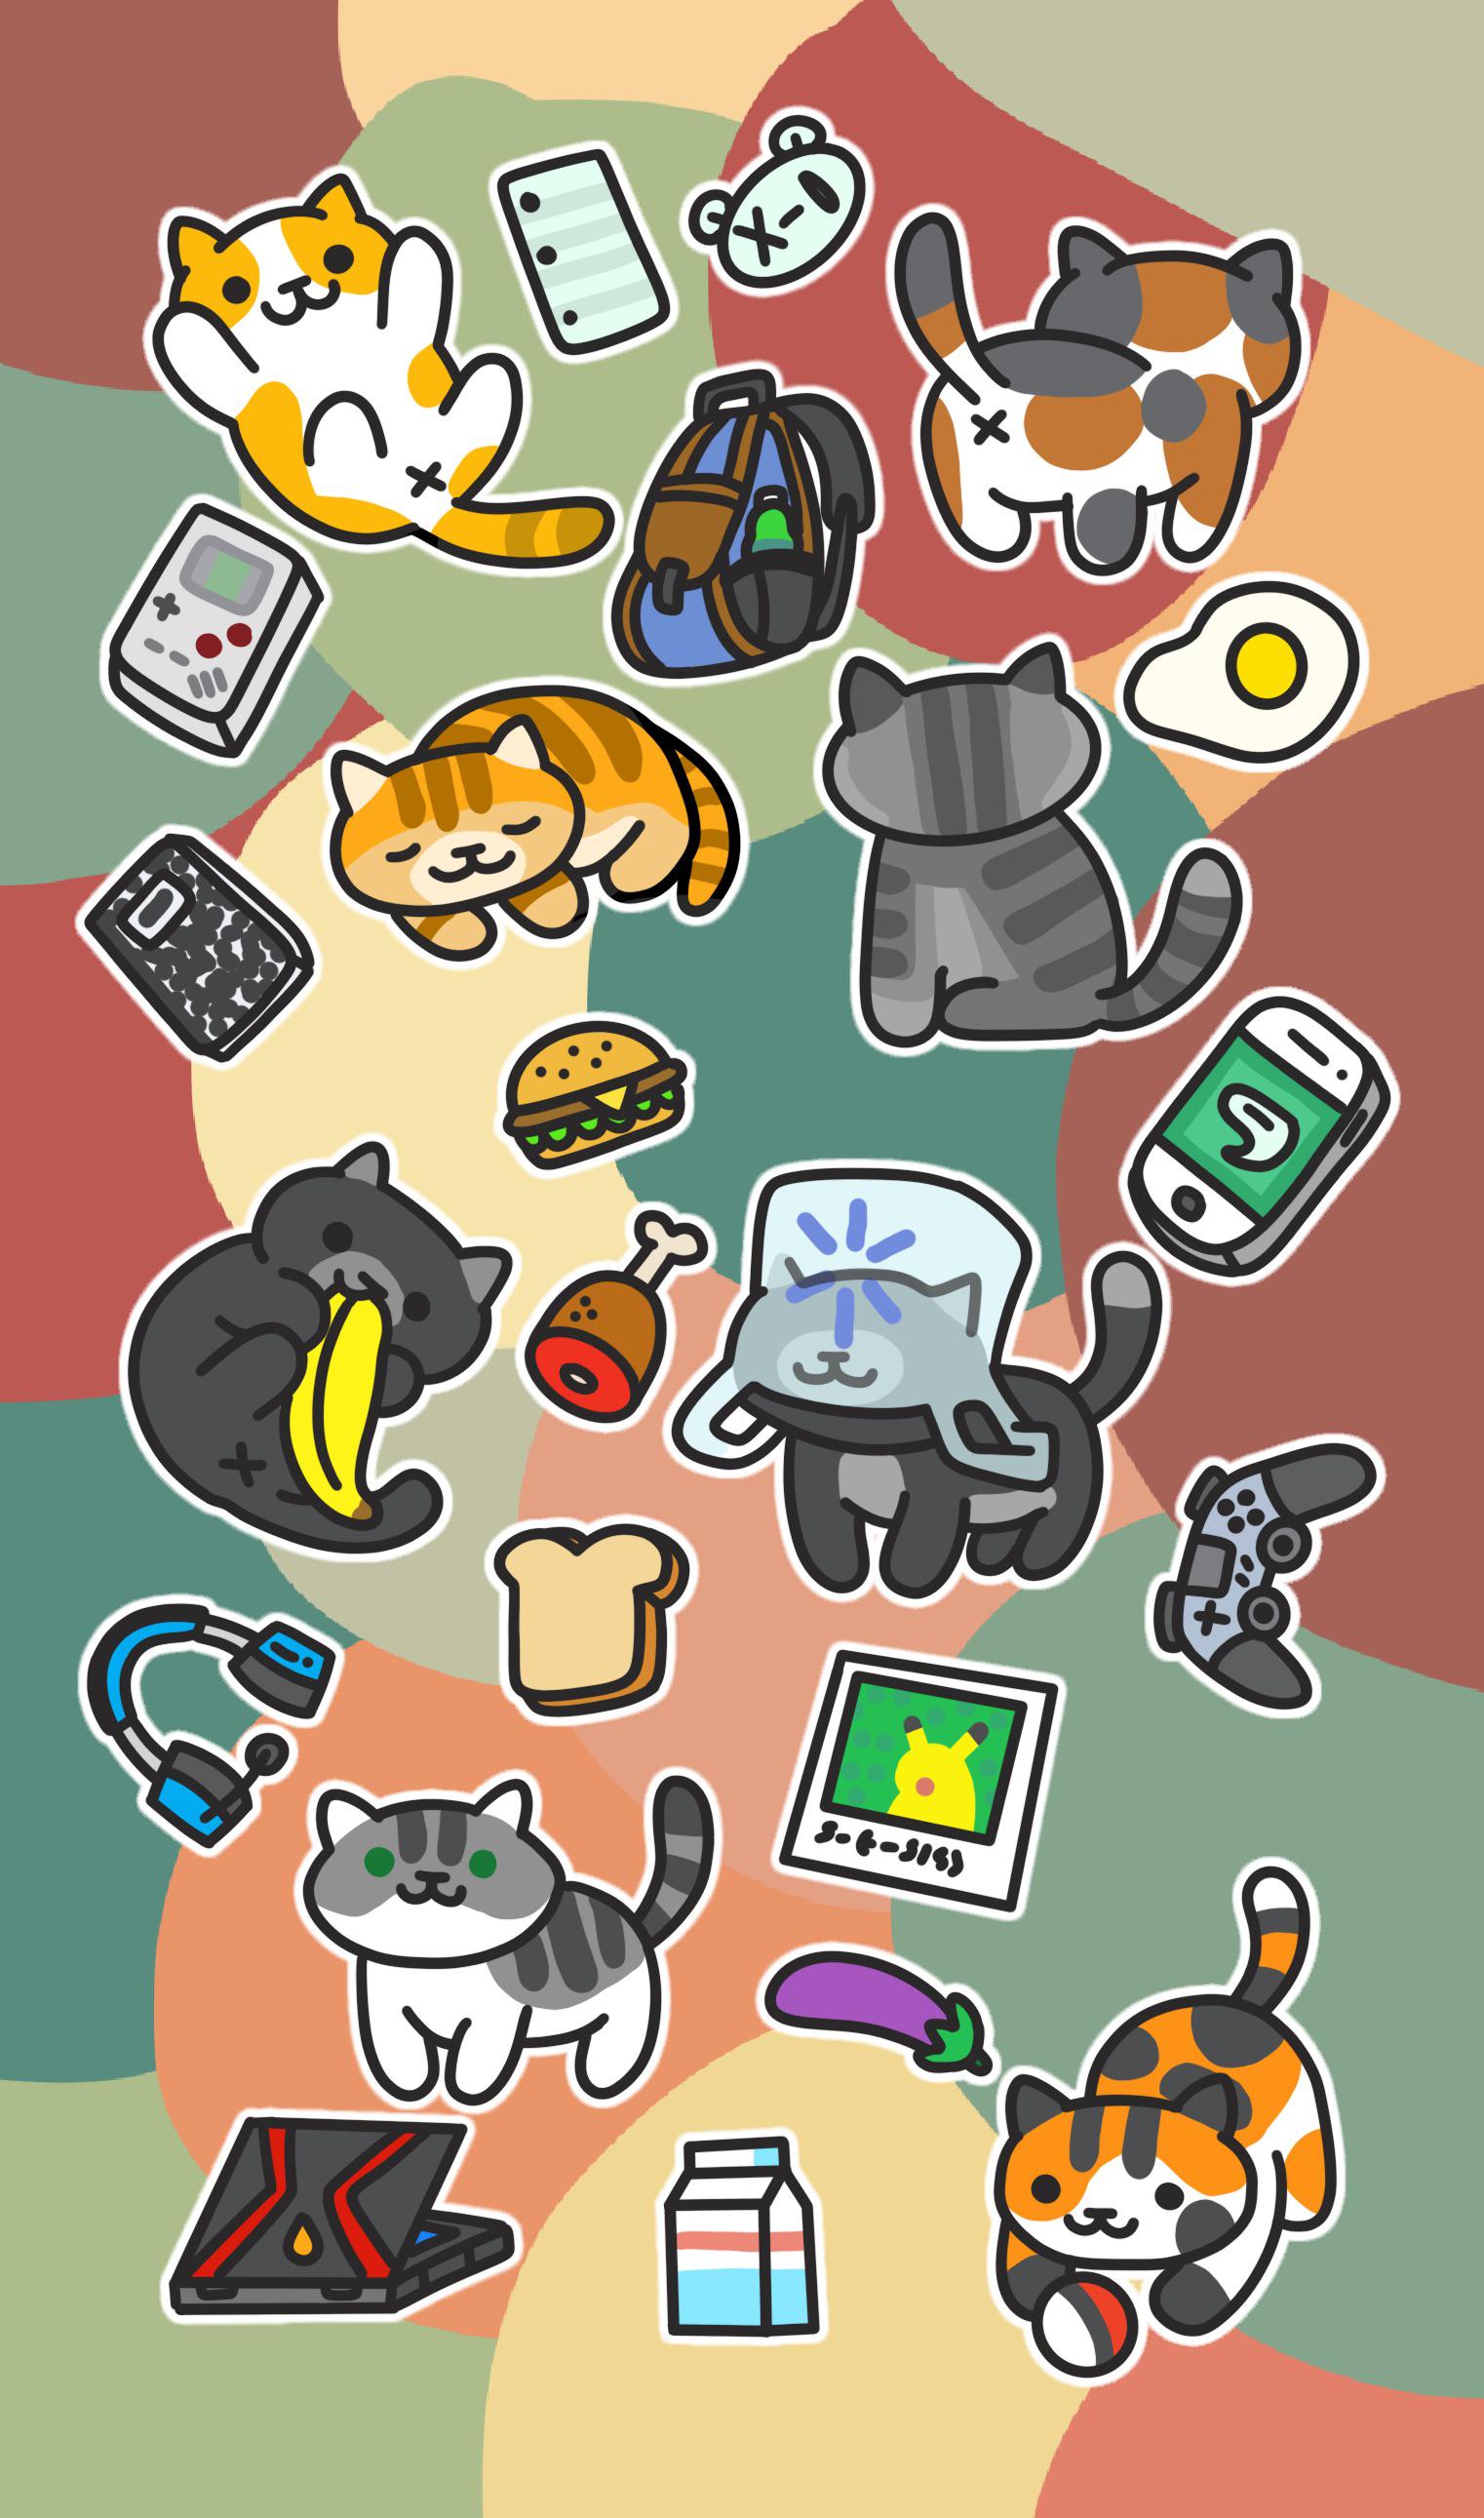 I like to draw my own wallpaper and this is just random cat designs of my own with items I like and use a lot